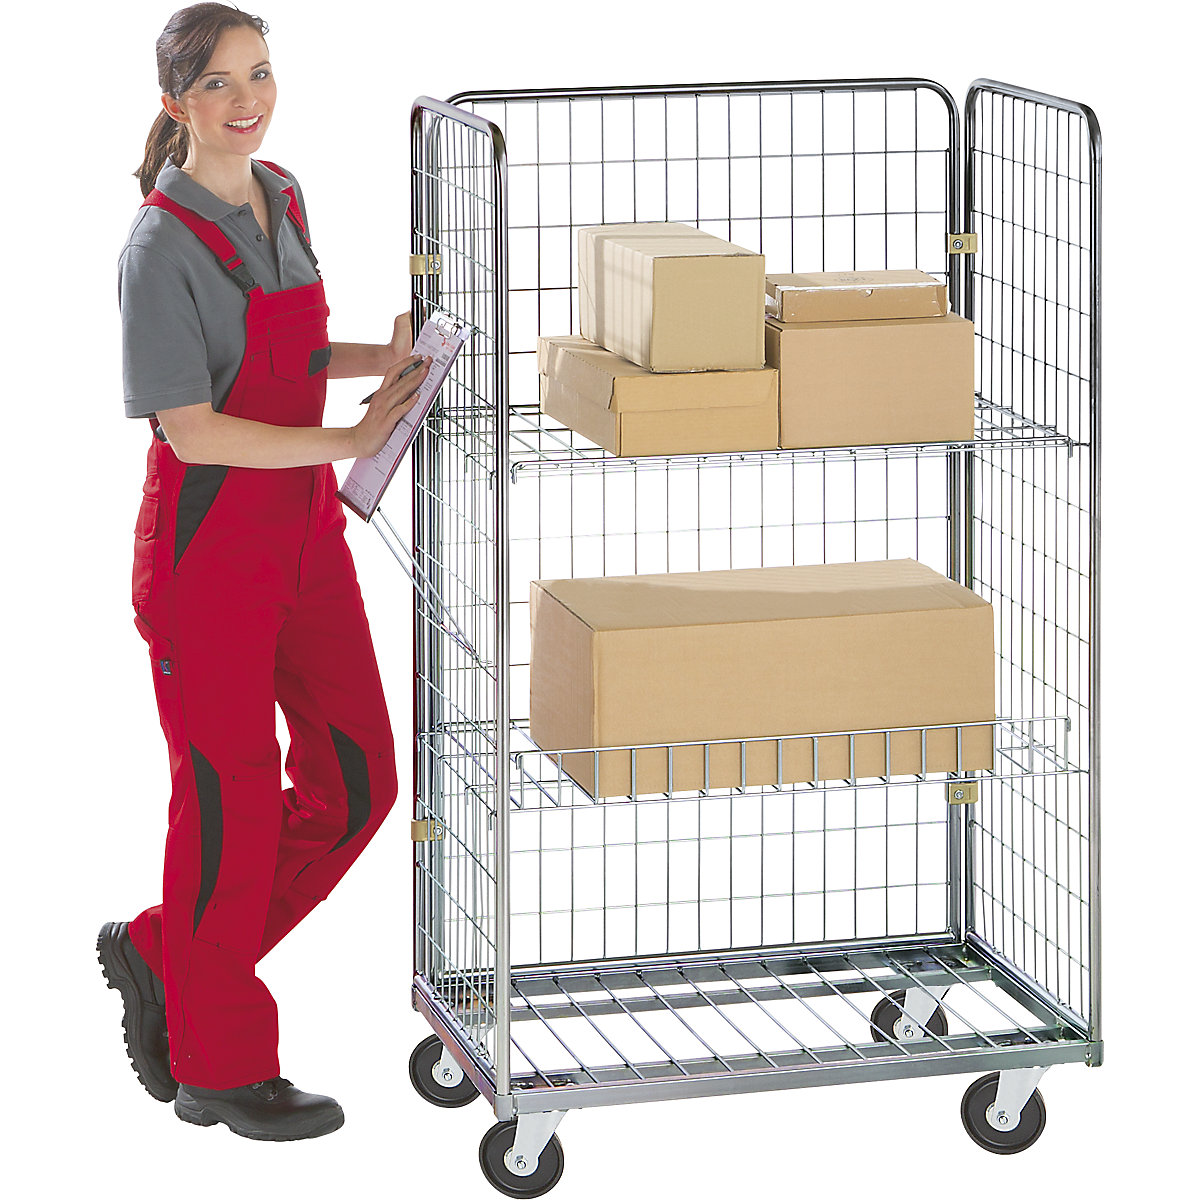 Roll containers, order picking trolley, WxD 1295 x 600 mm, height 1585 mm, wheel Ø 100 mm, 10+ items-7